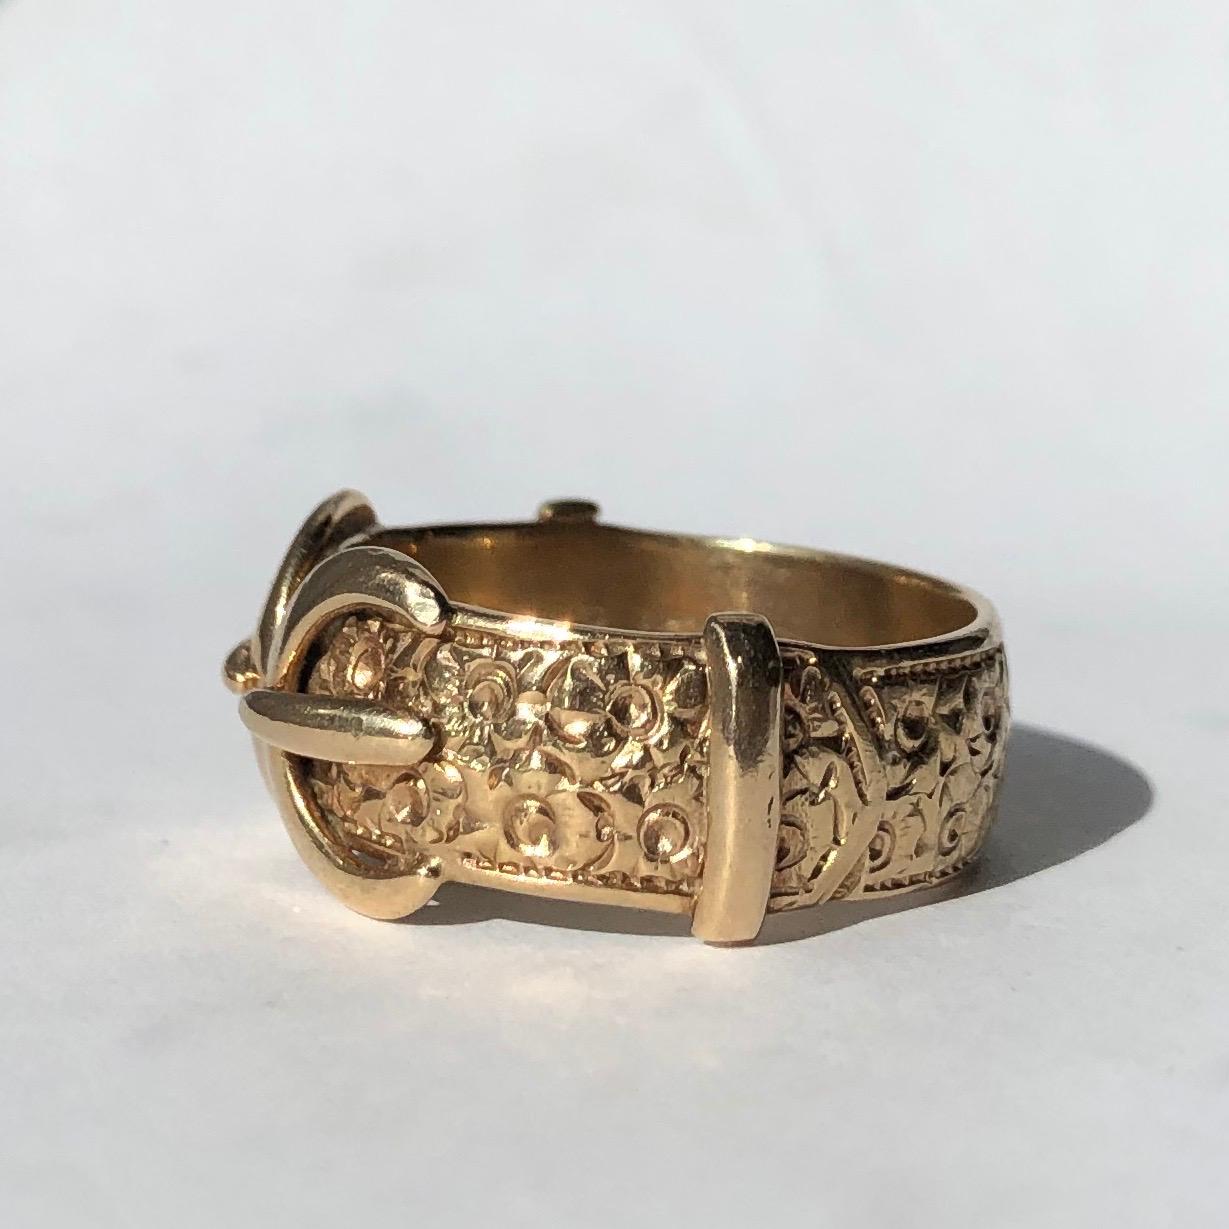 This gorgeous gold band was made in the 1940’s and is extra large and chunky! The double buckle detail is paired with fine engraving which is all around the band. Made in Birmingham, England. 

Ring Size: U 1/2 or 10 1/4
Band Width: 11mm

Weight: